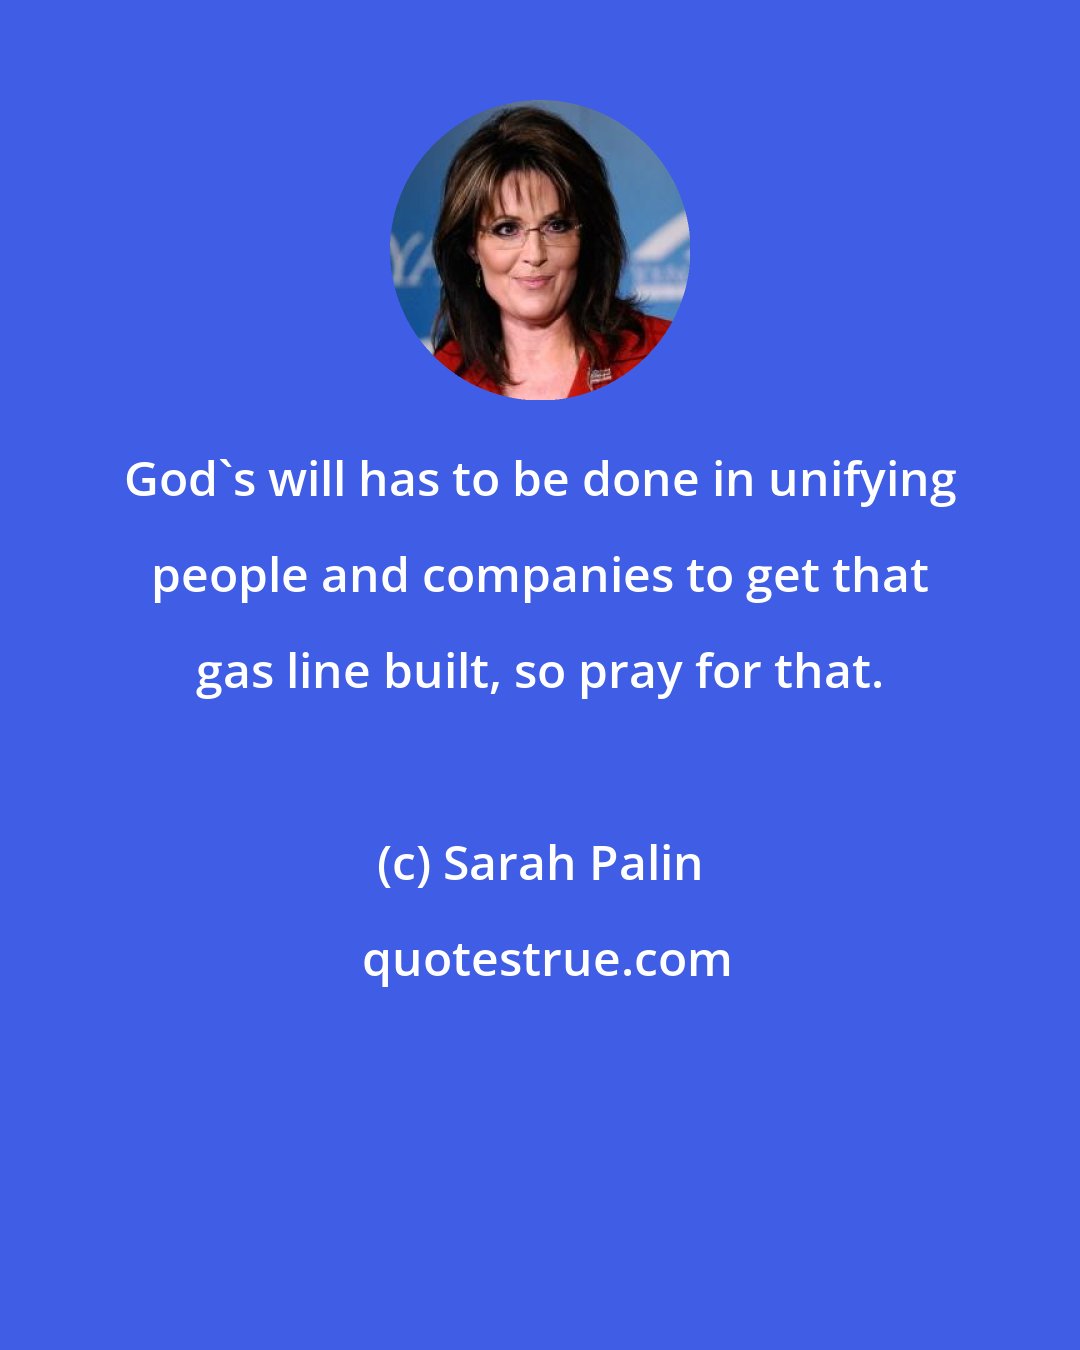 Sarah Palin: God's will has to be done in unifying people and companies to get that gas line built, so pray for that.